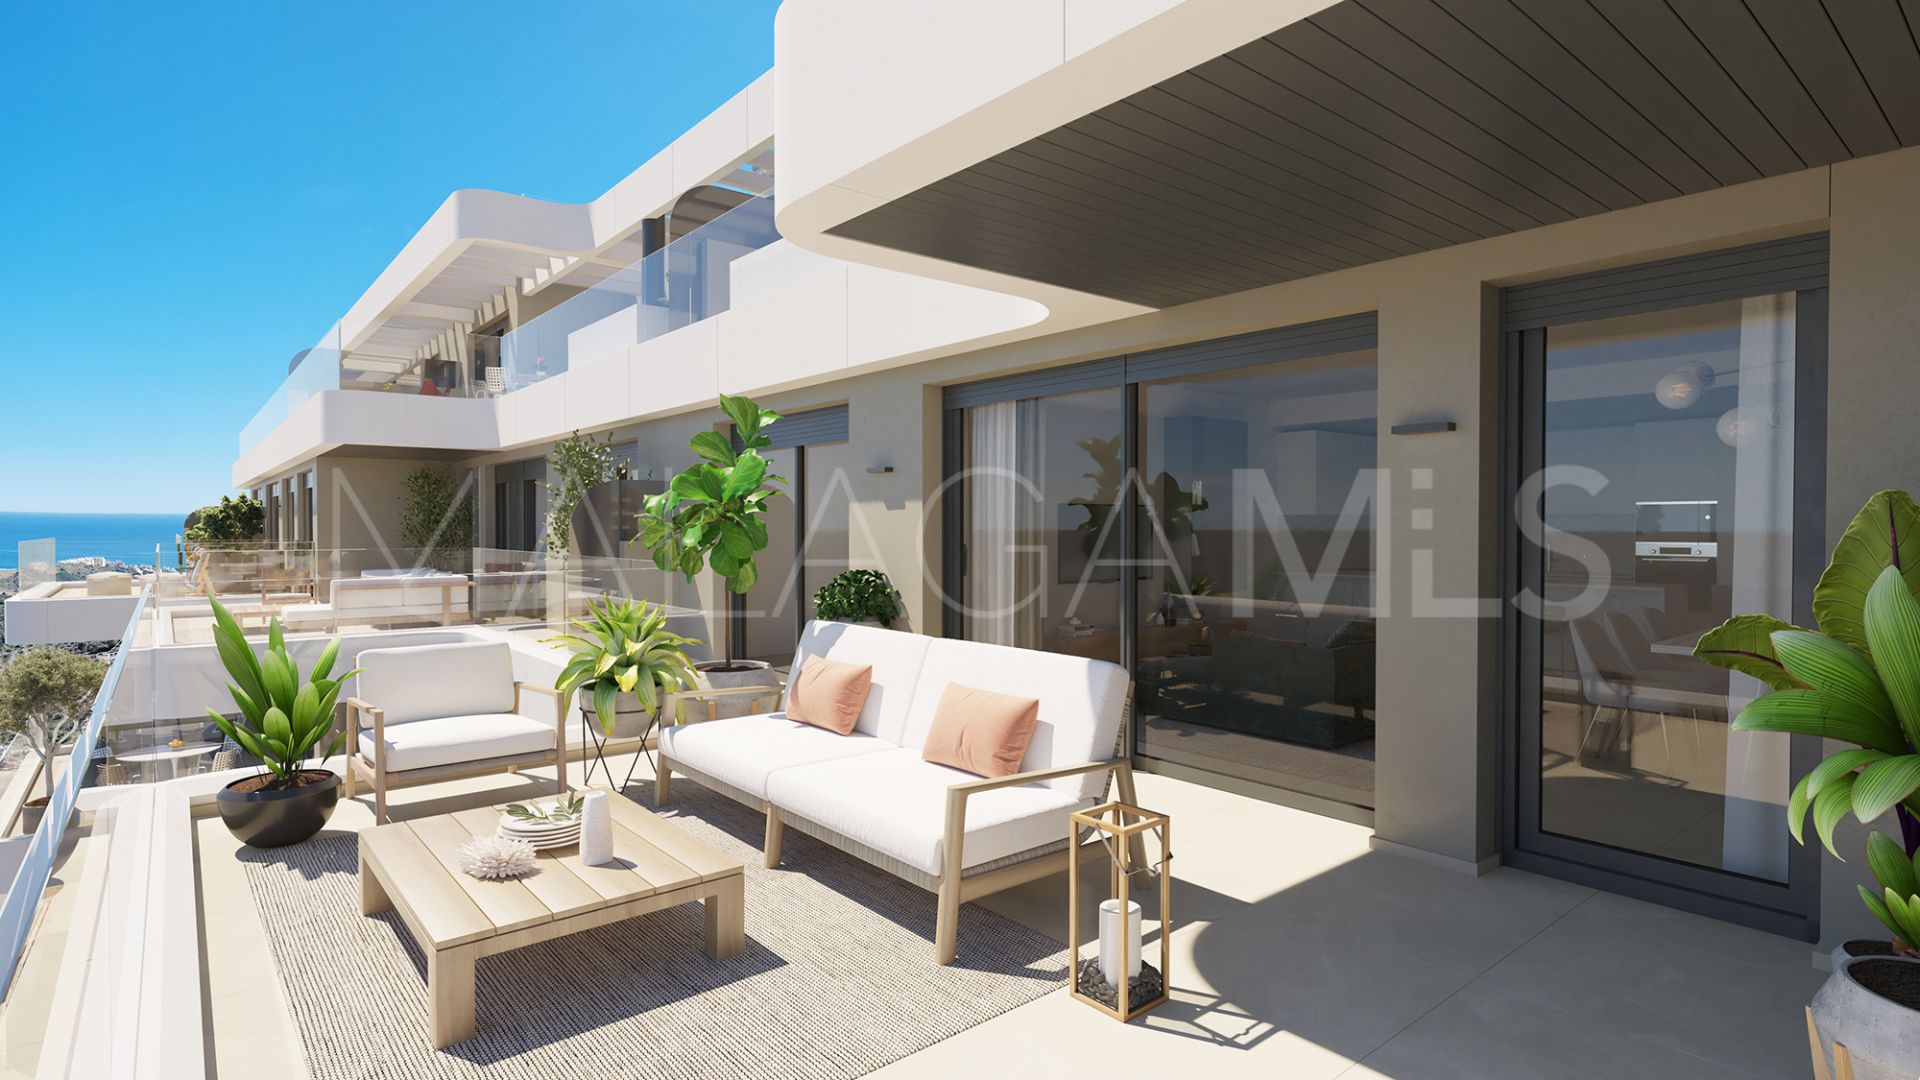 For sale La Gaspara ground floor apartment with 3 bedrooms